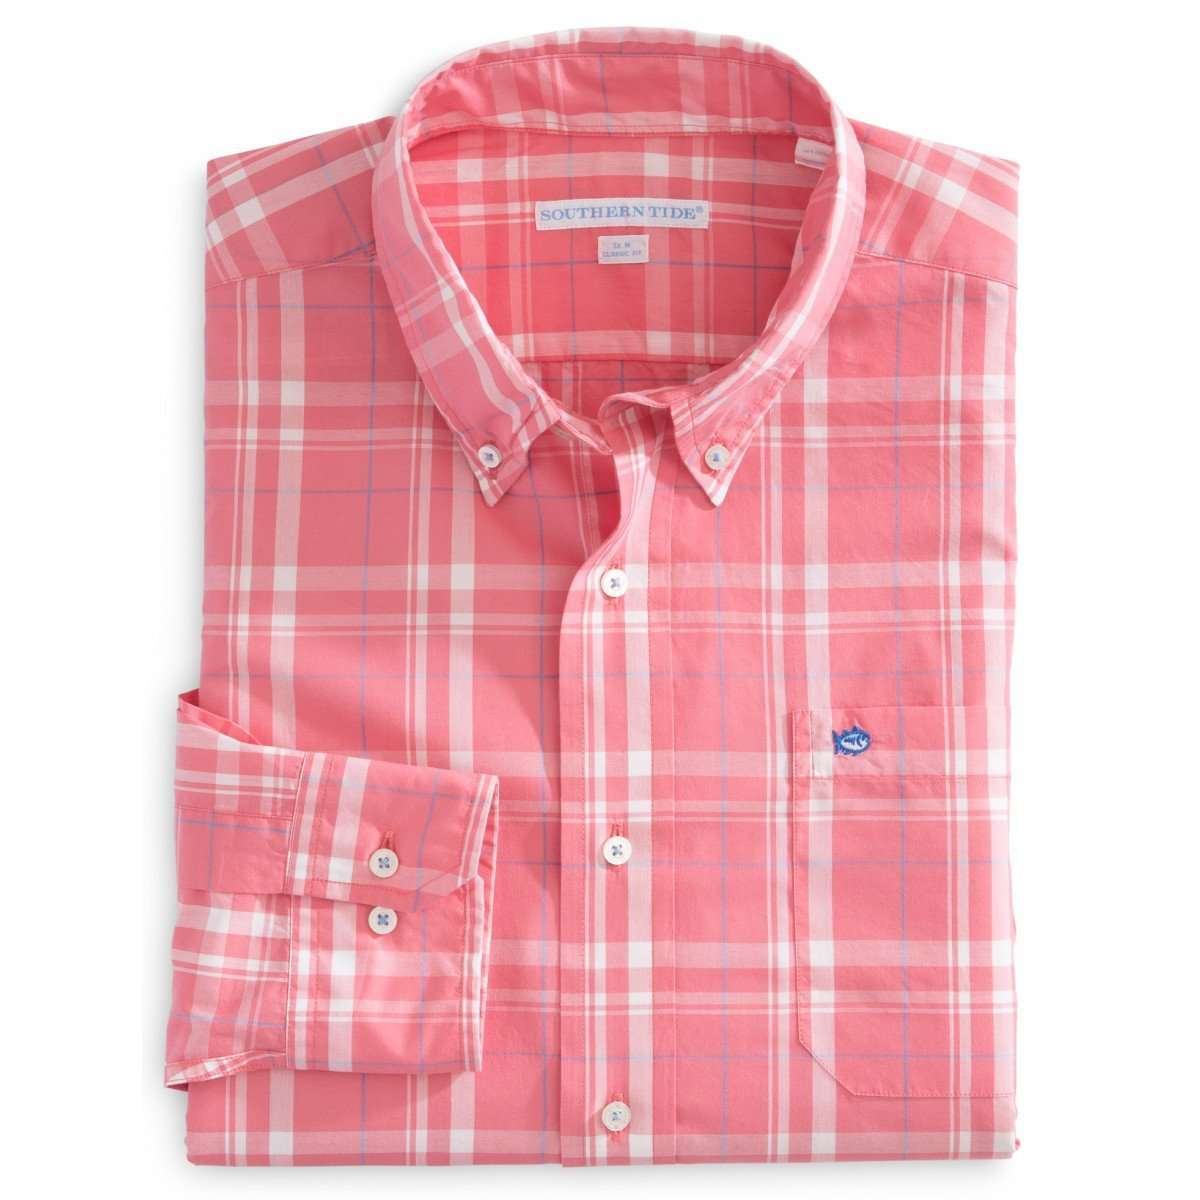 Windsail Plaid Classic Fit Sport Shirt in Coral Beach by Southern Tide - Country Club Prep